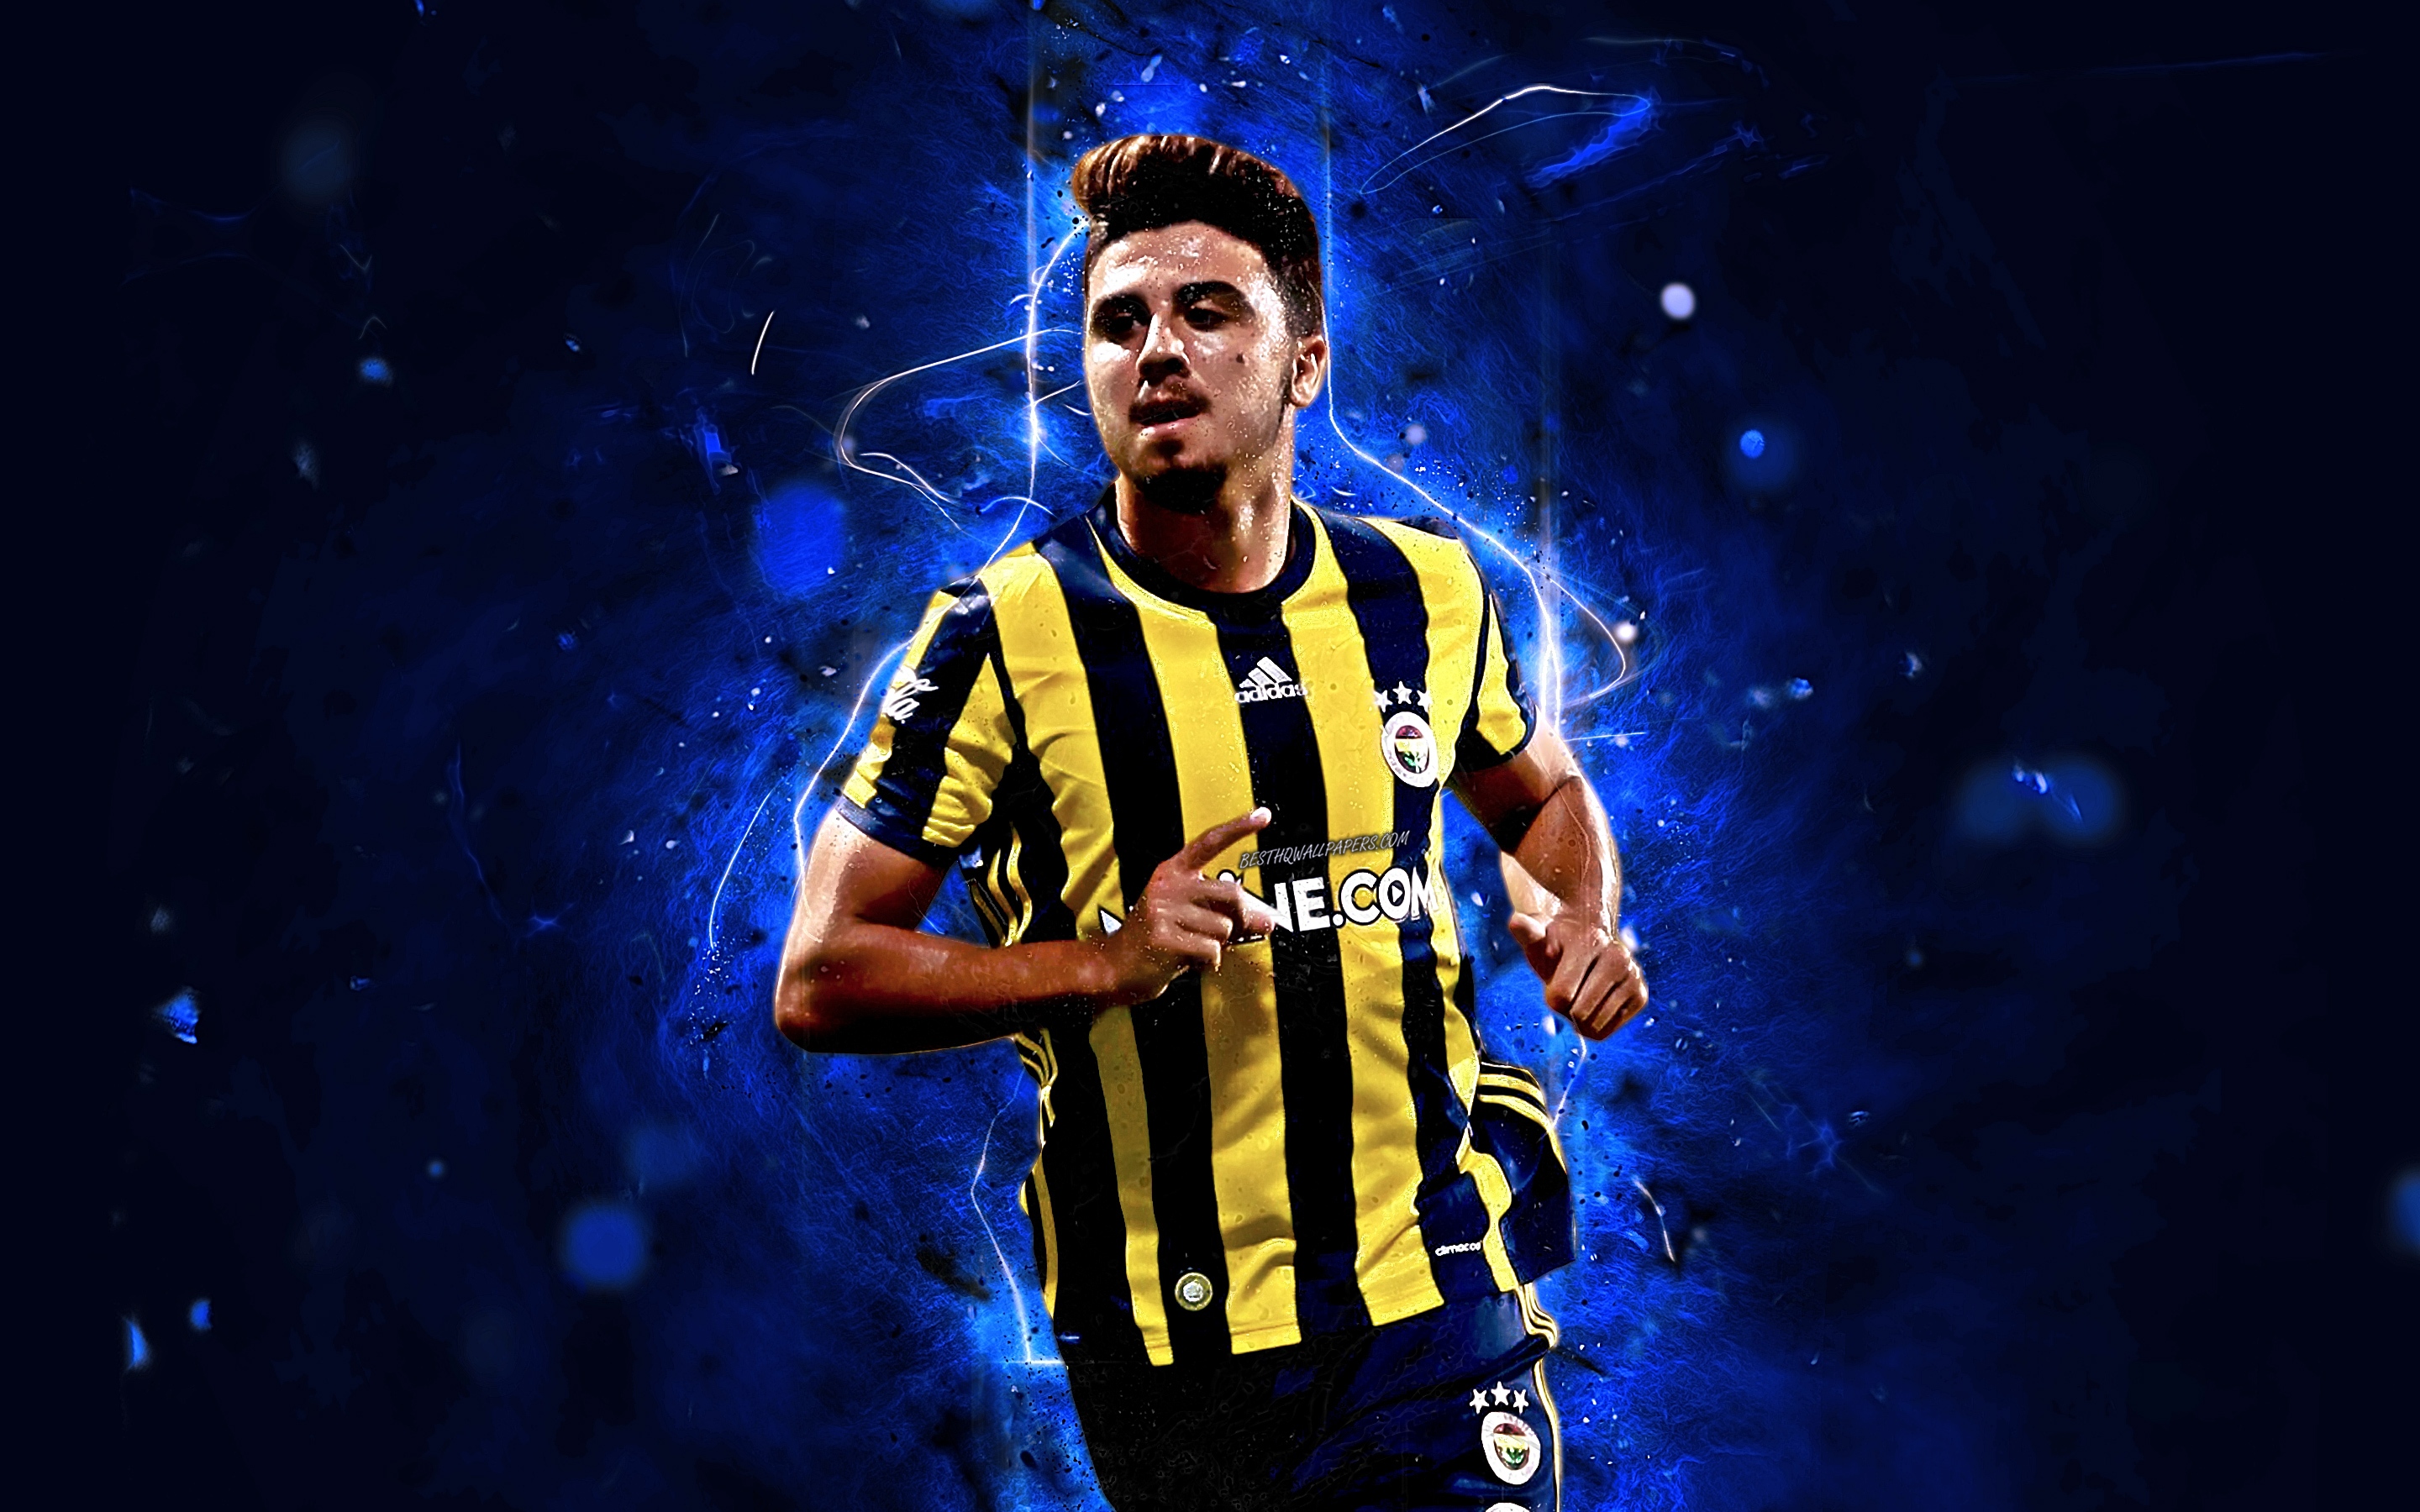 Download wallpaper Ozan Tufan, abstract art, turkish footballers, Fenerbahce FC, soccer, Tufan, neon lights, Turkish Super Lig, creative for desktop with resolution 2880x1800. High Quality HD picture wallpaper